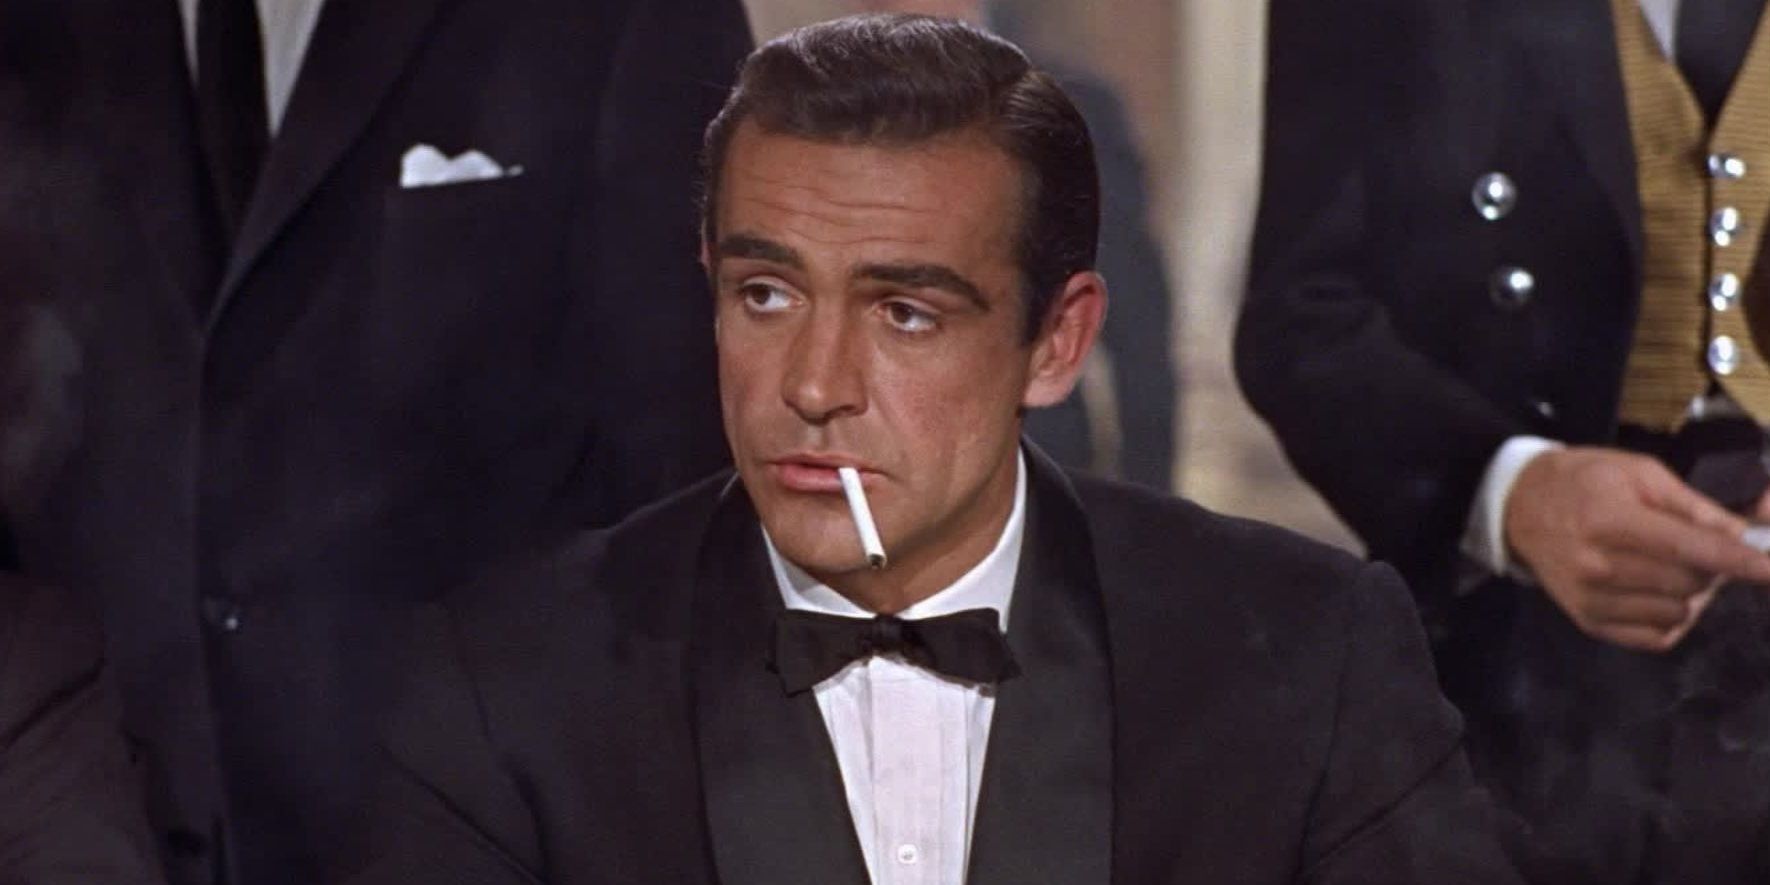 007 10 Facts About James Bond That Fans & Newcomers Need To Know -  pokemonwe.com